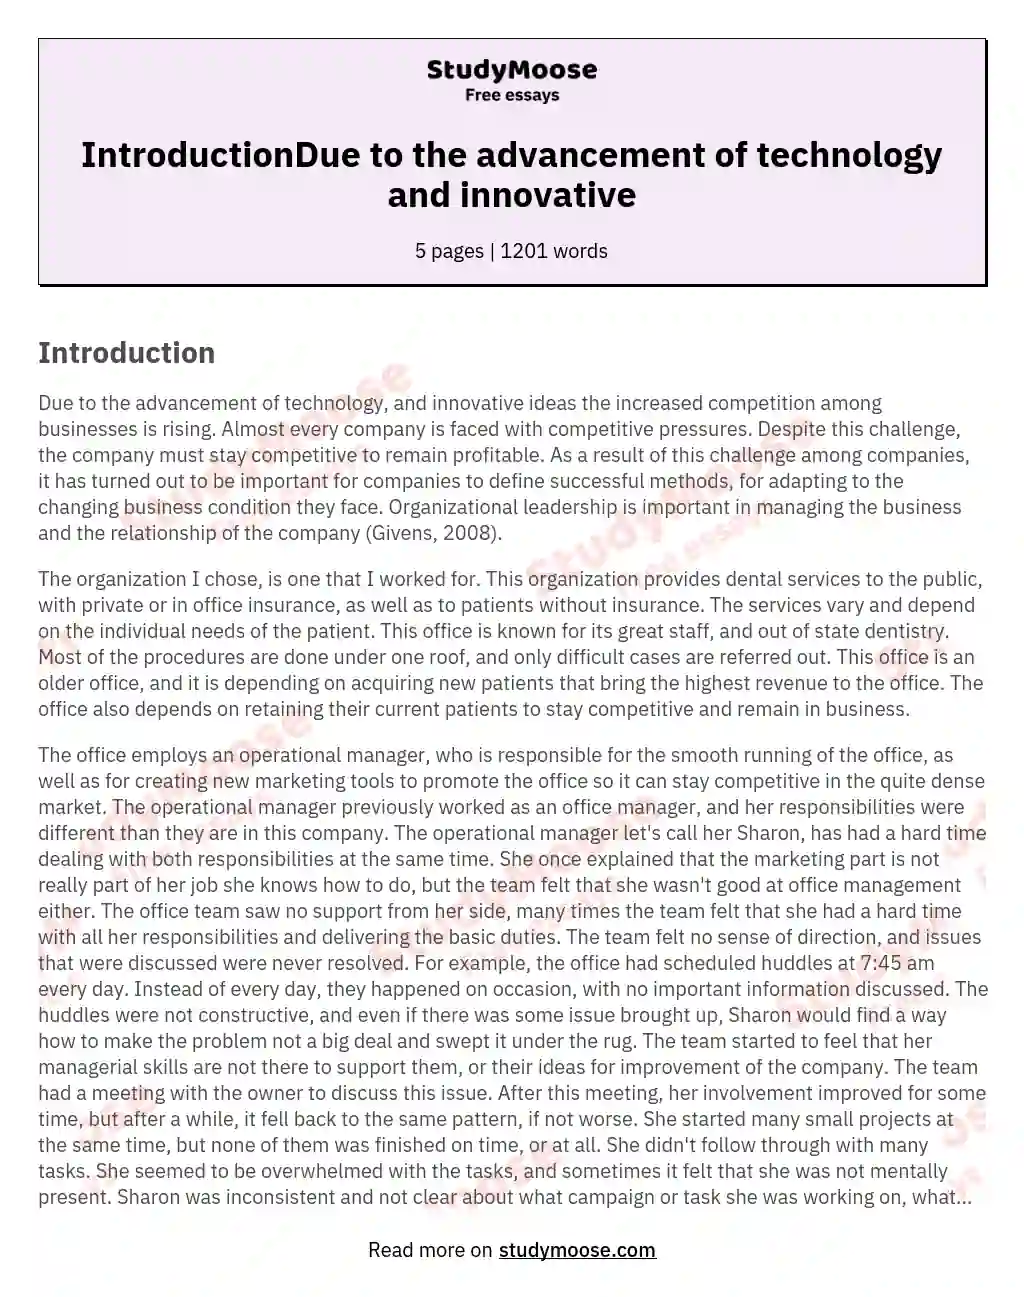 IntroductionDue to the advancement of technology and innovative essay